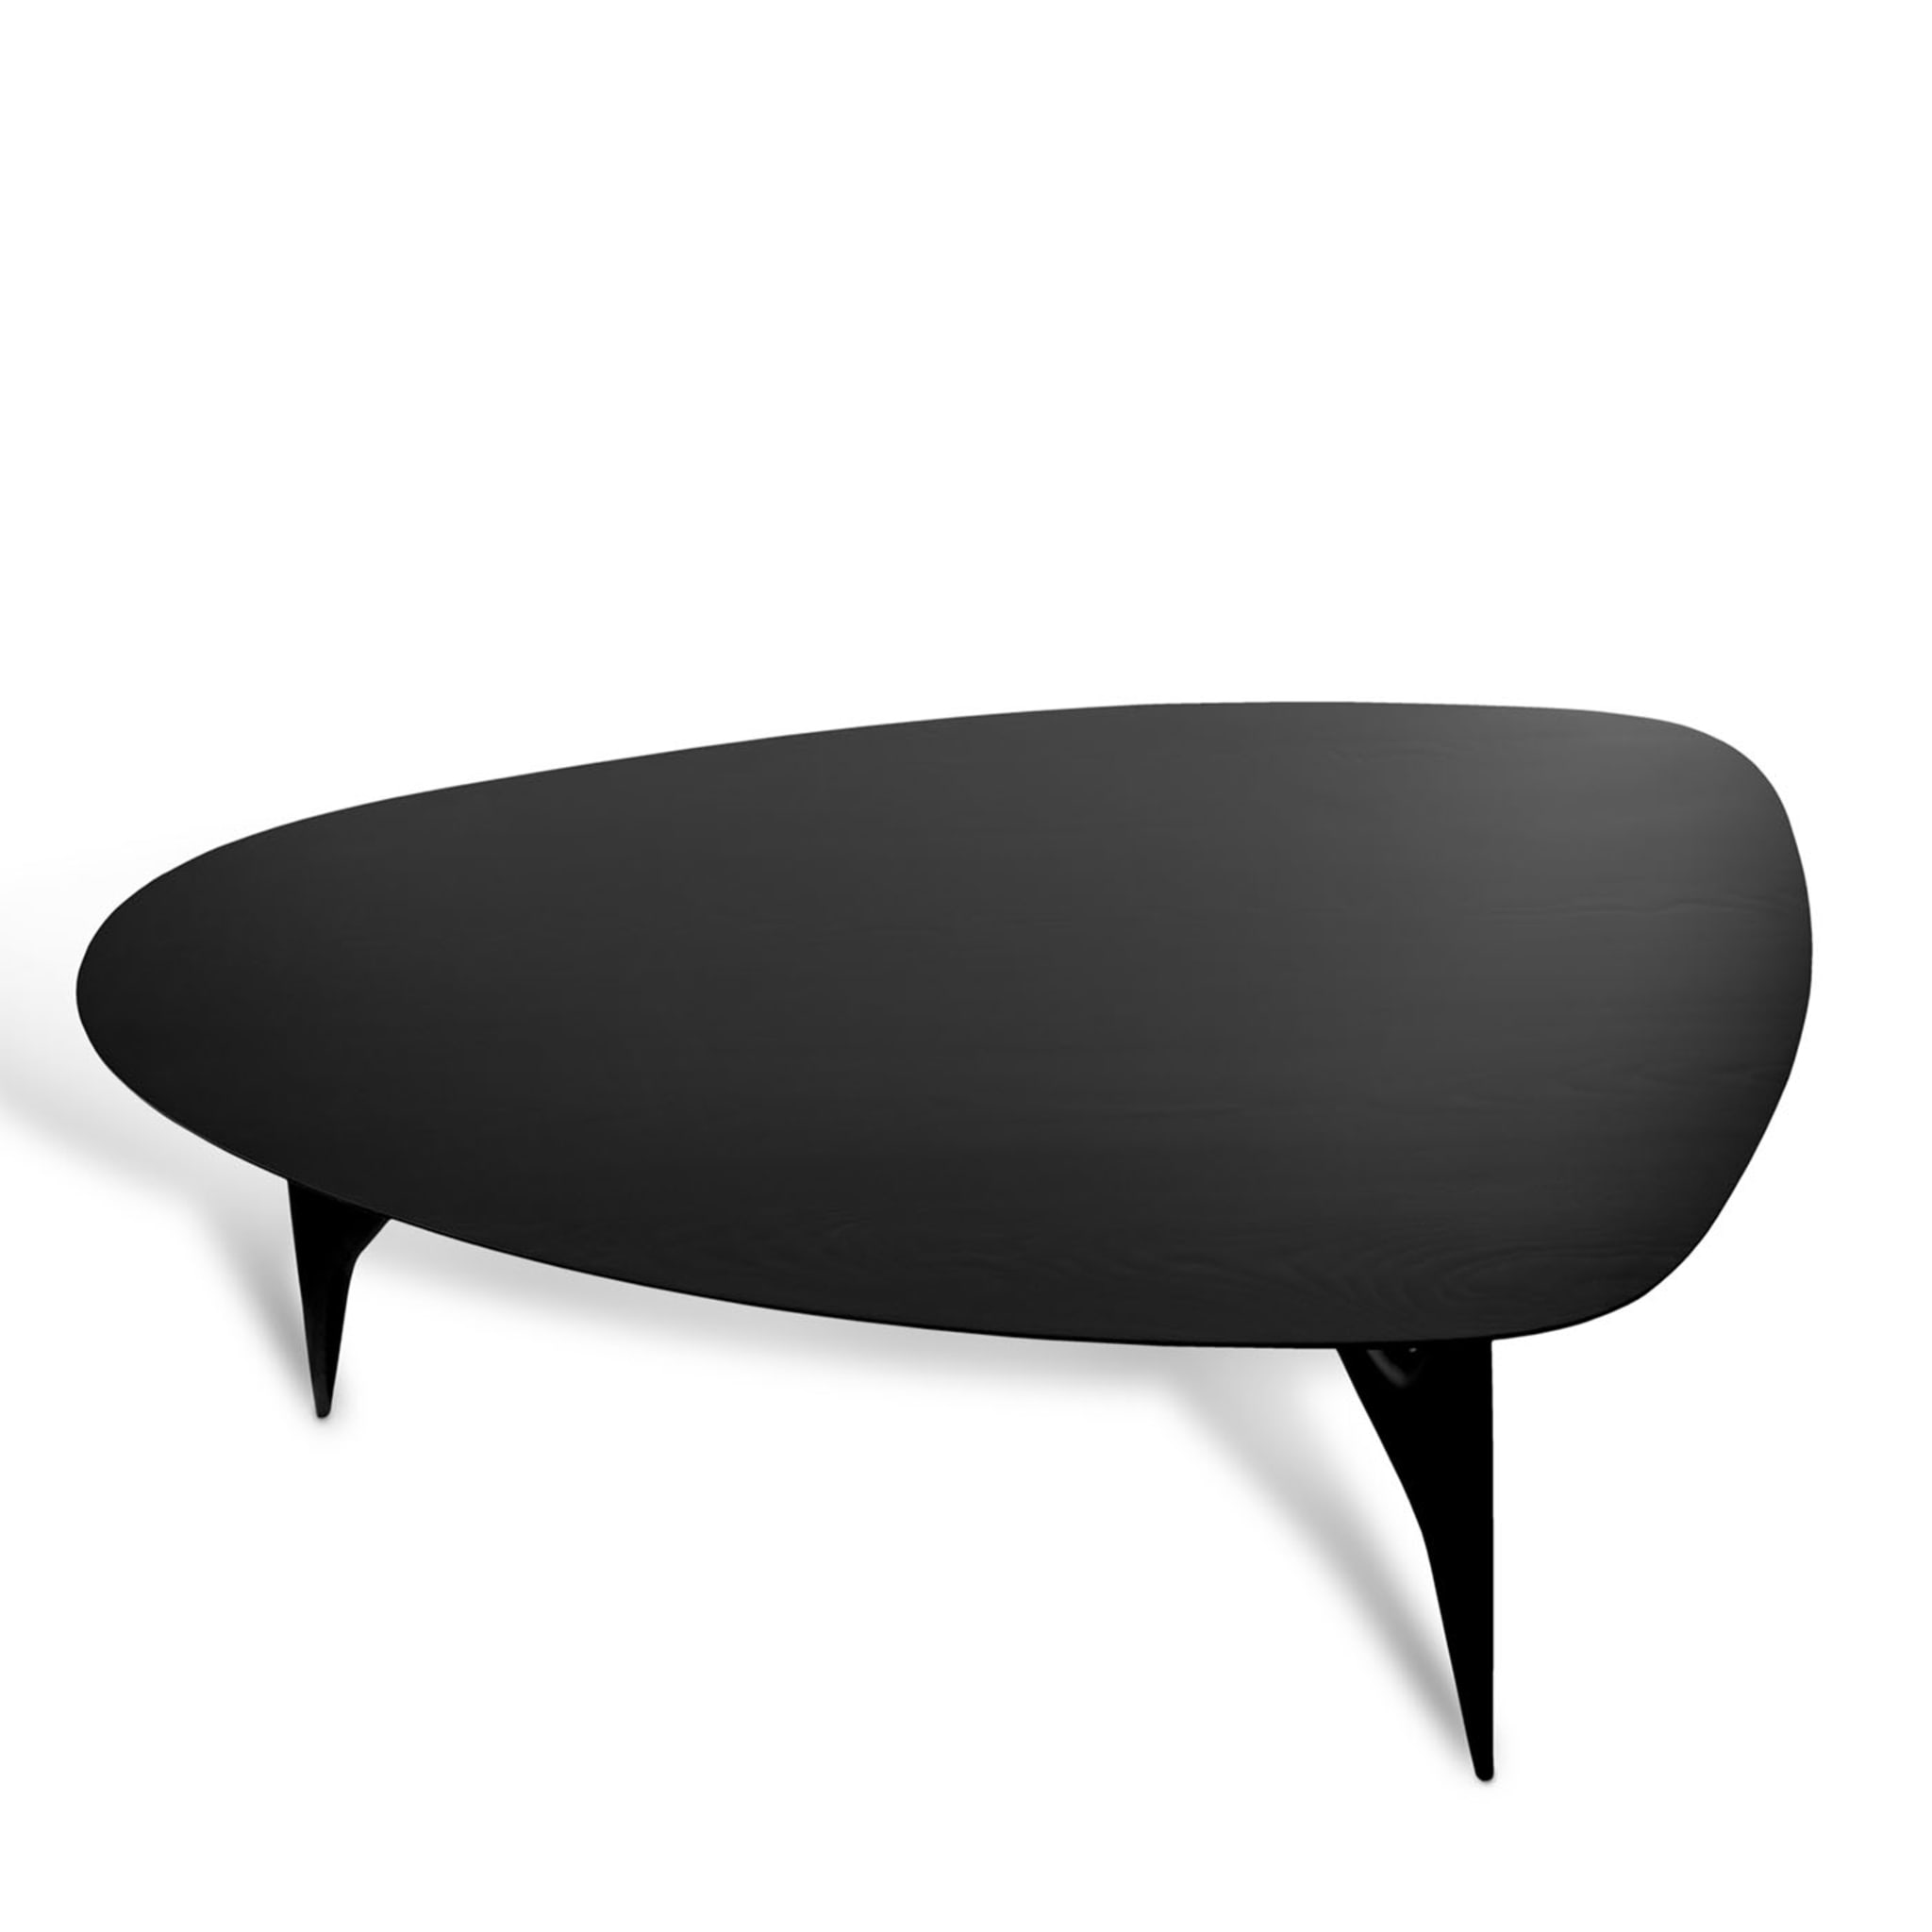 Ted Masterpiece Black Small Table - Alternative view 1